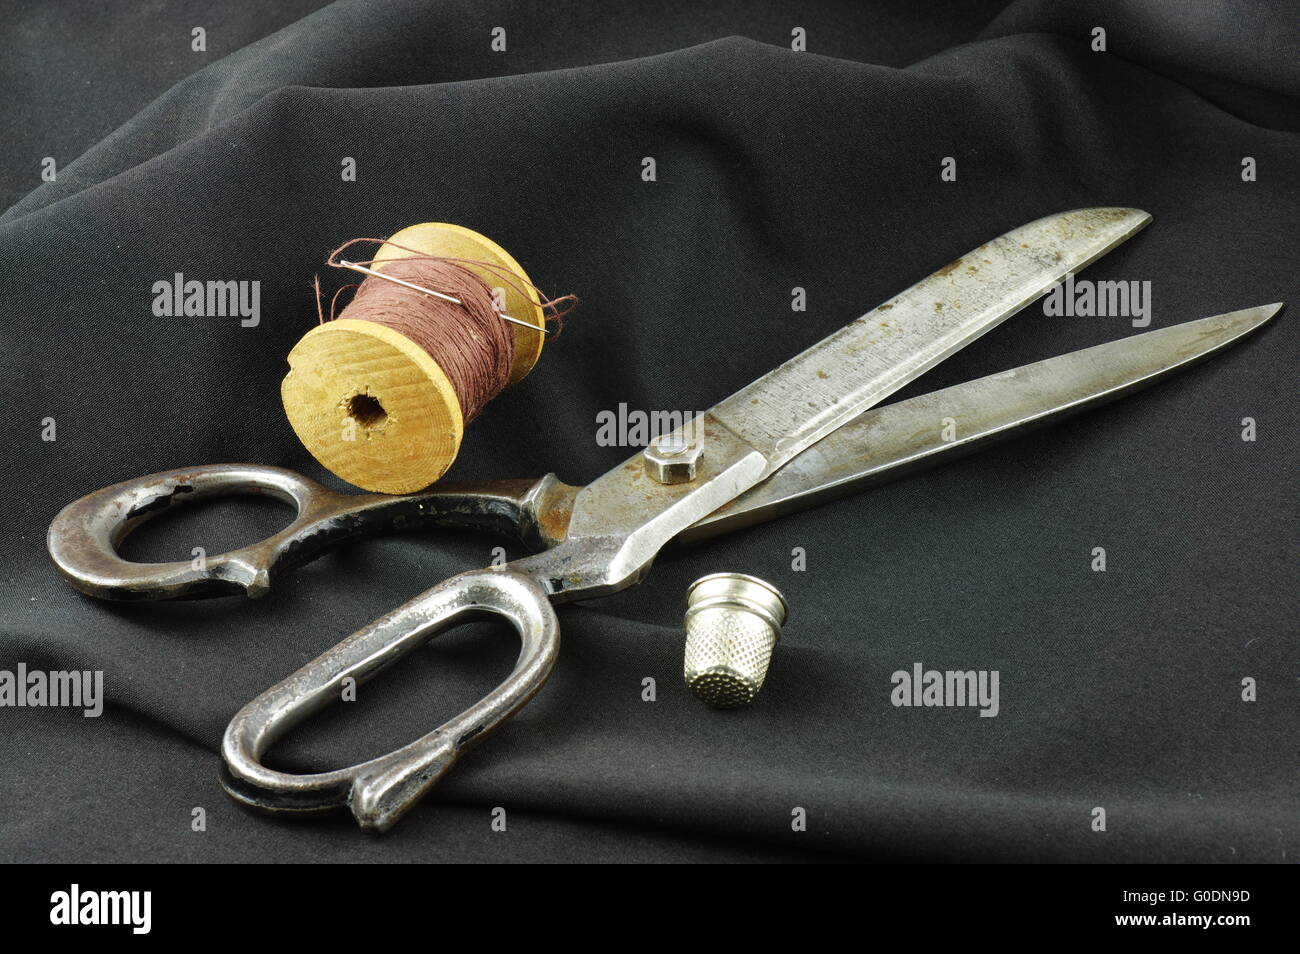 Old dressmaker shears, wooden spool of thread with a needle and a thimble. On a dark, undulating fabric. Stock Photo